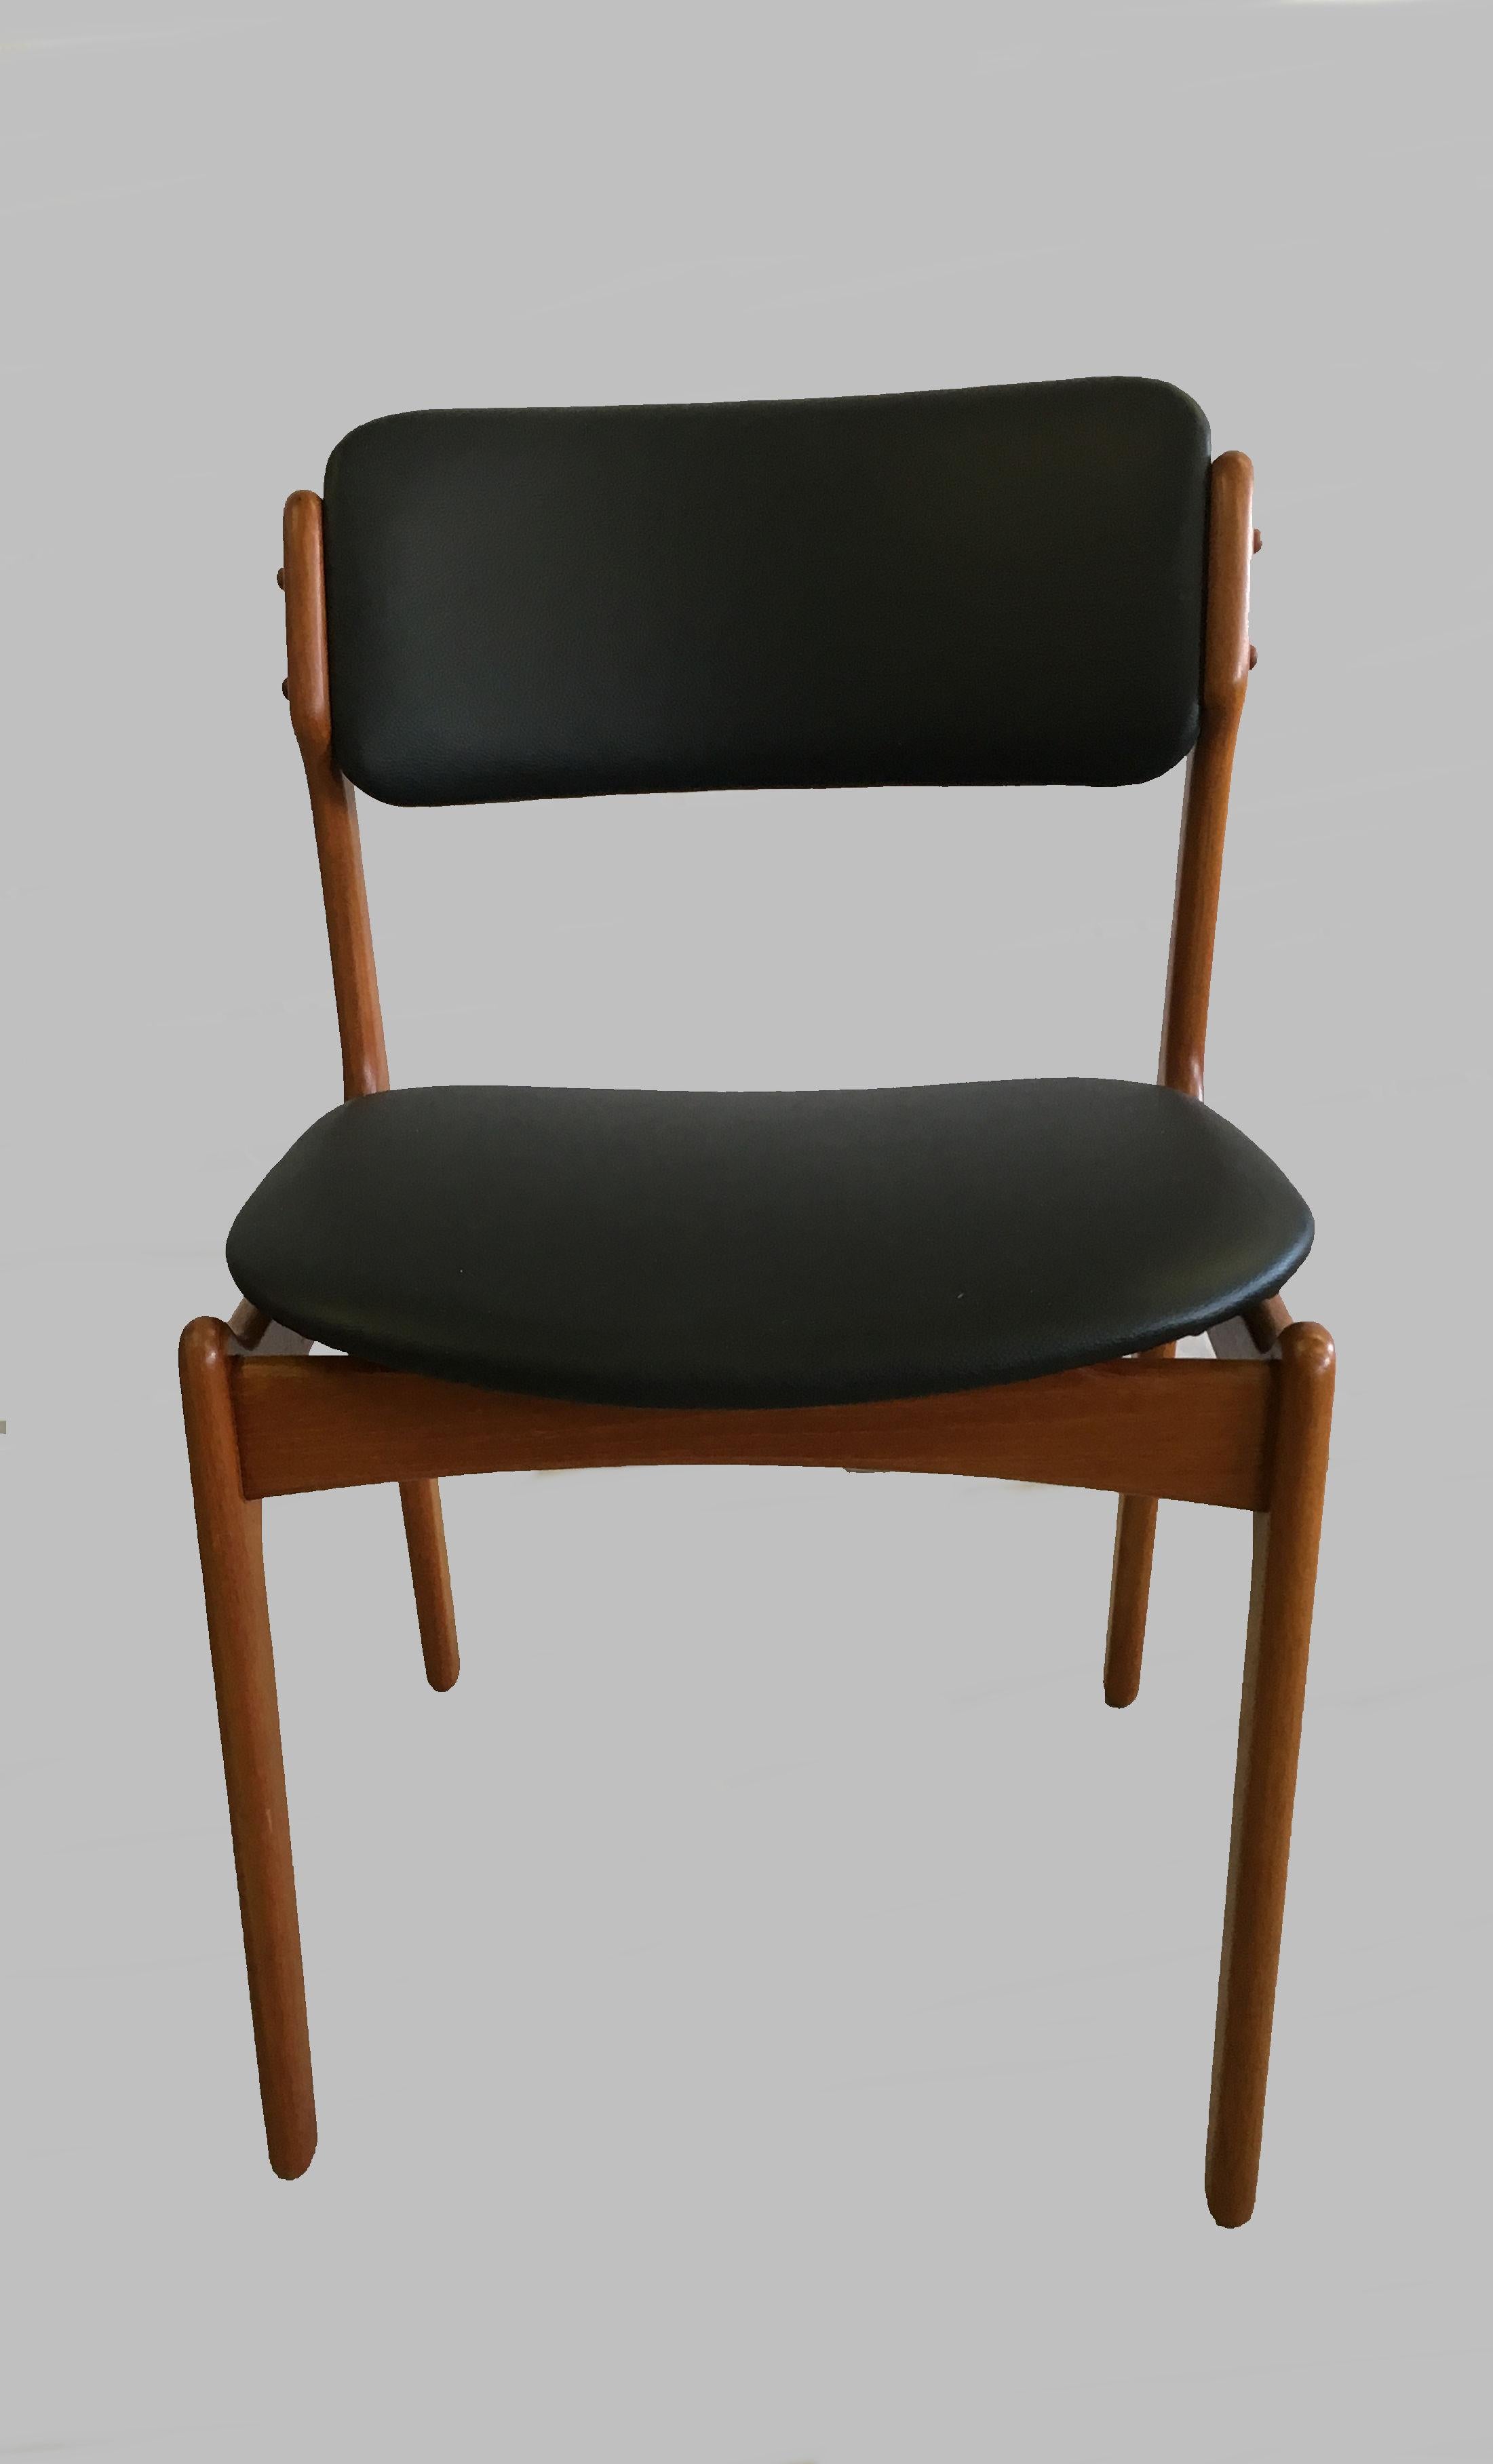 1960s set of four teak dining chairs with floating seat designed by Erik Buch for Oddense Maskinsnedkeri in 1949.

The chairs have a simple yet solid construction with elegant lines and provide a very comfortable seating experience on the elegant